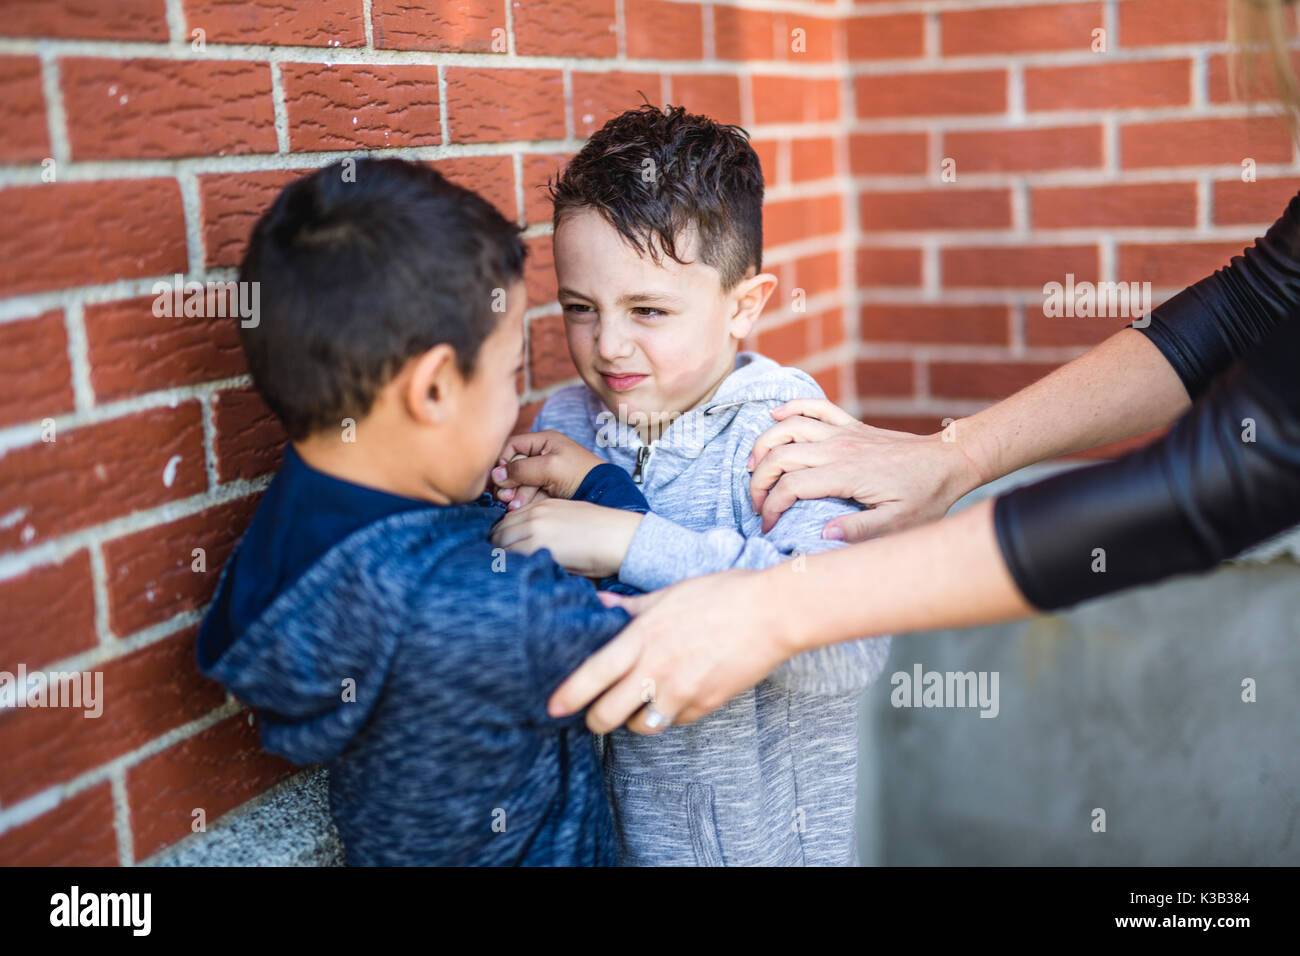 Teacher Stopping Two Boys Fighting In Playground Stock Photo